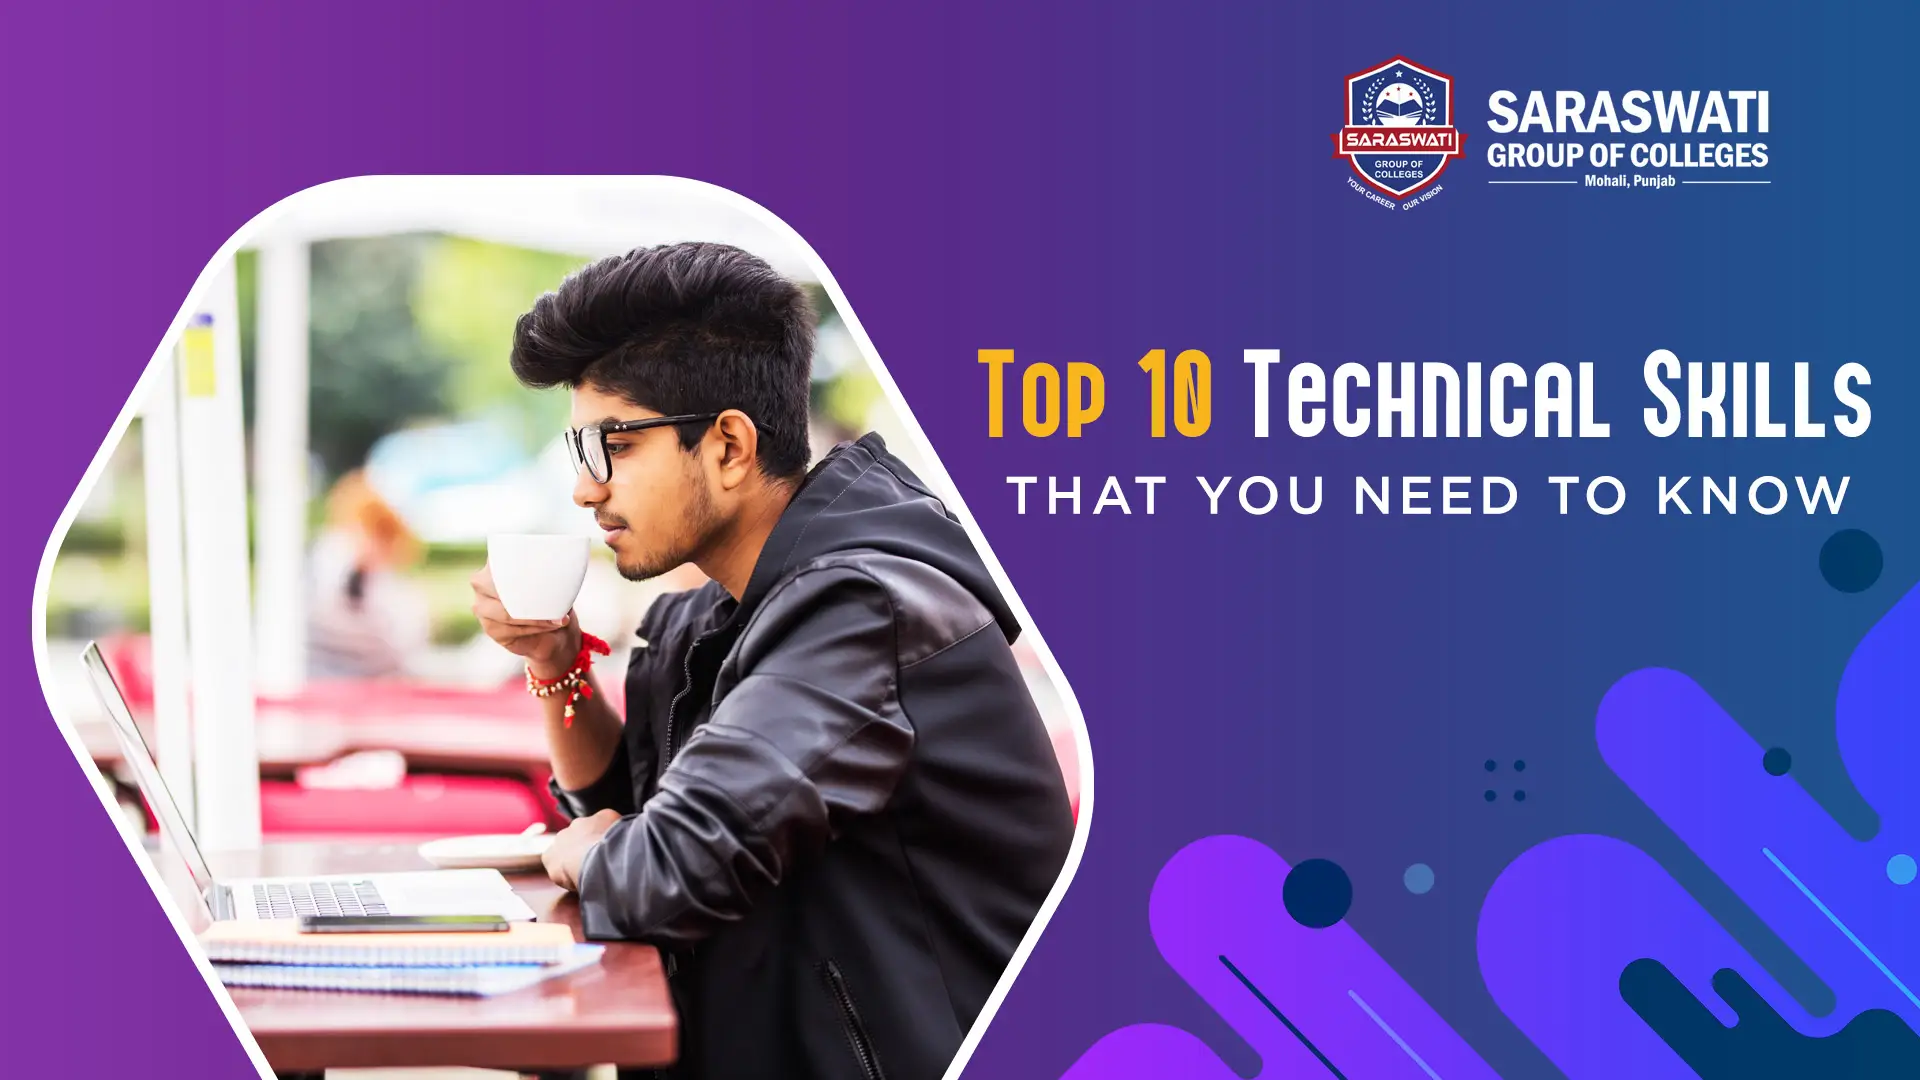 Top 10 Technical Skills That You Need To Know